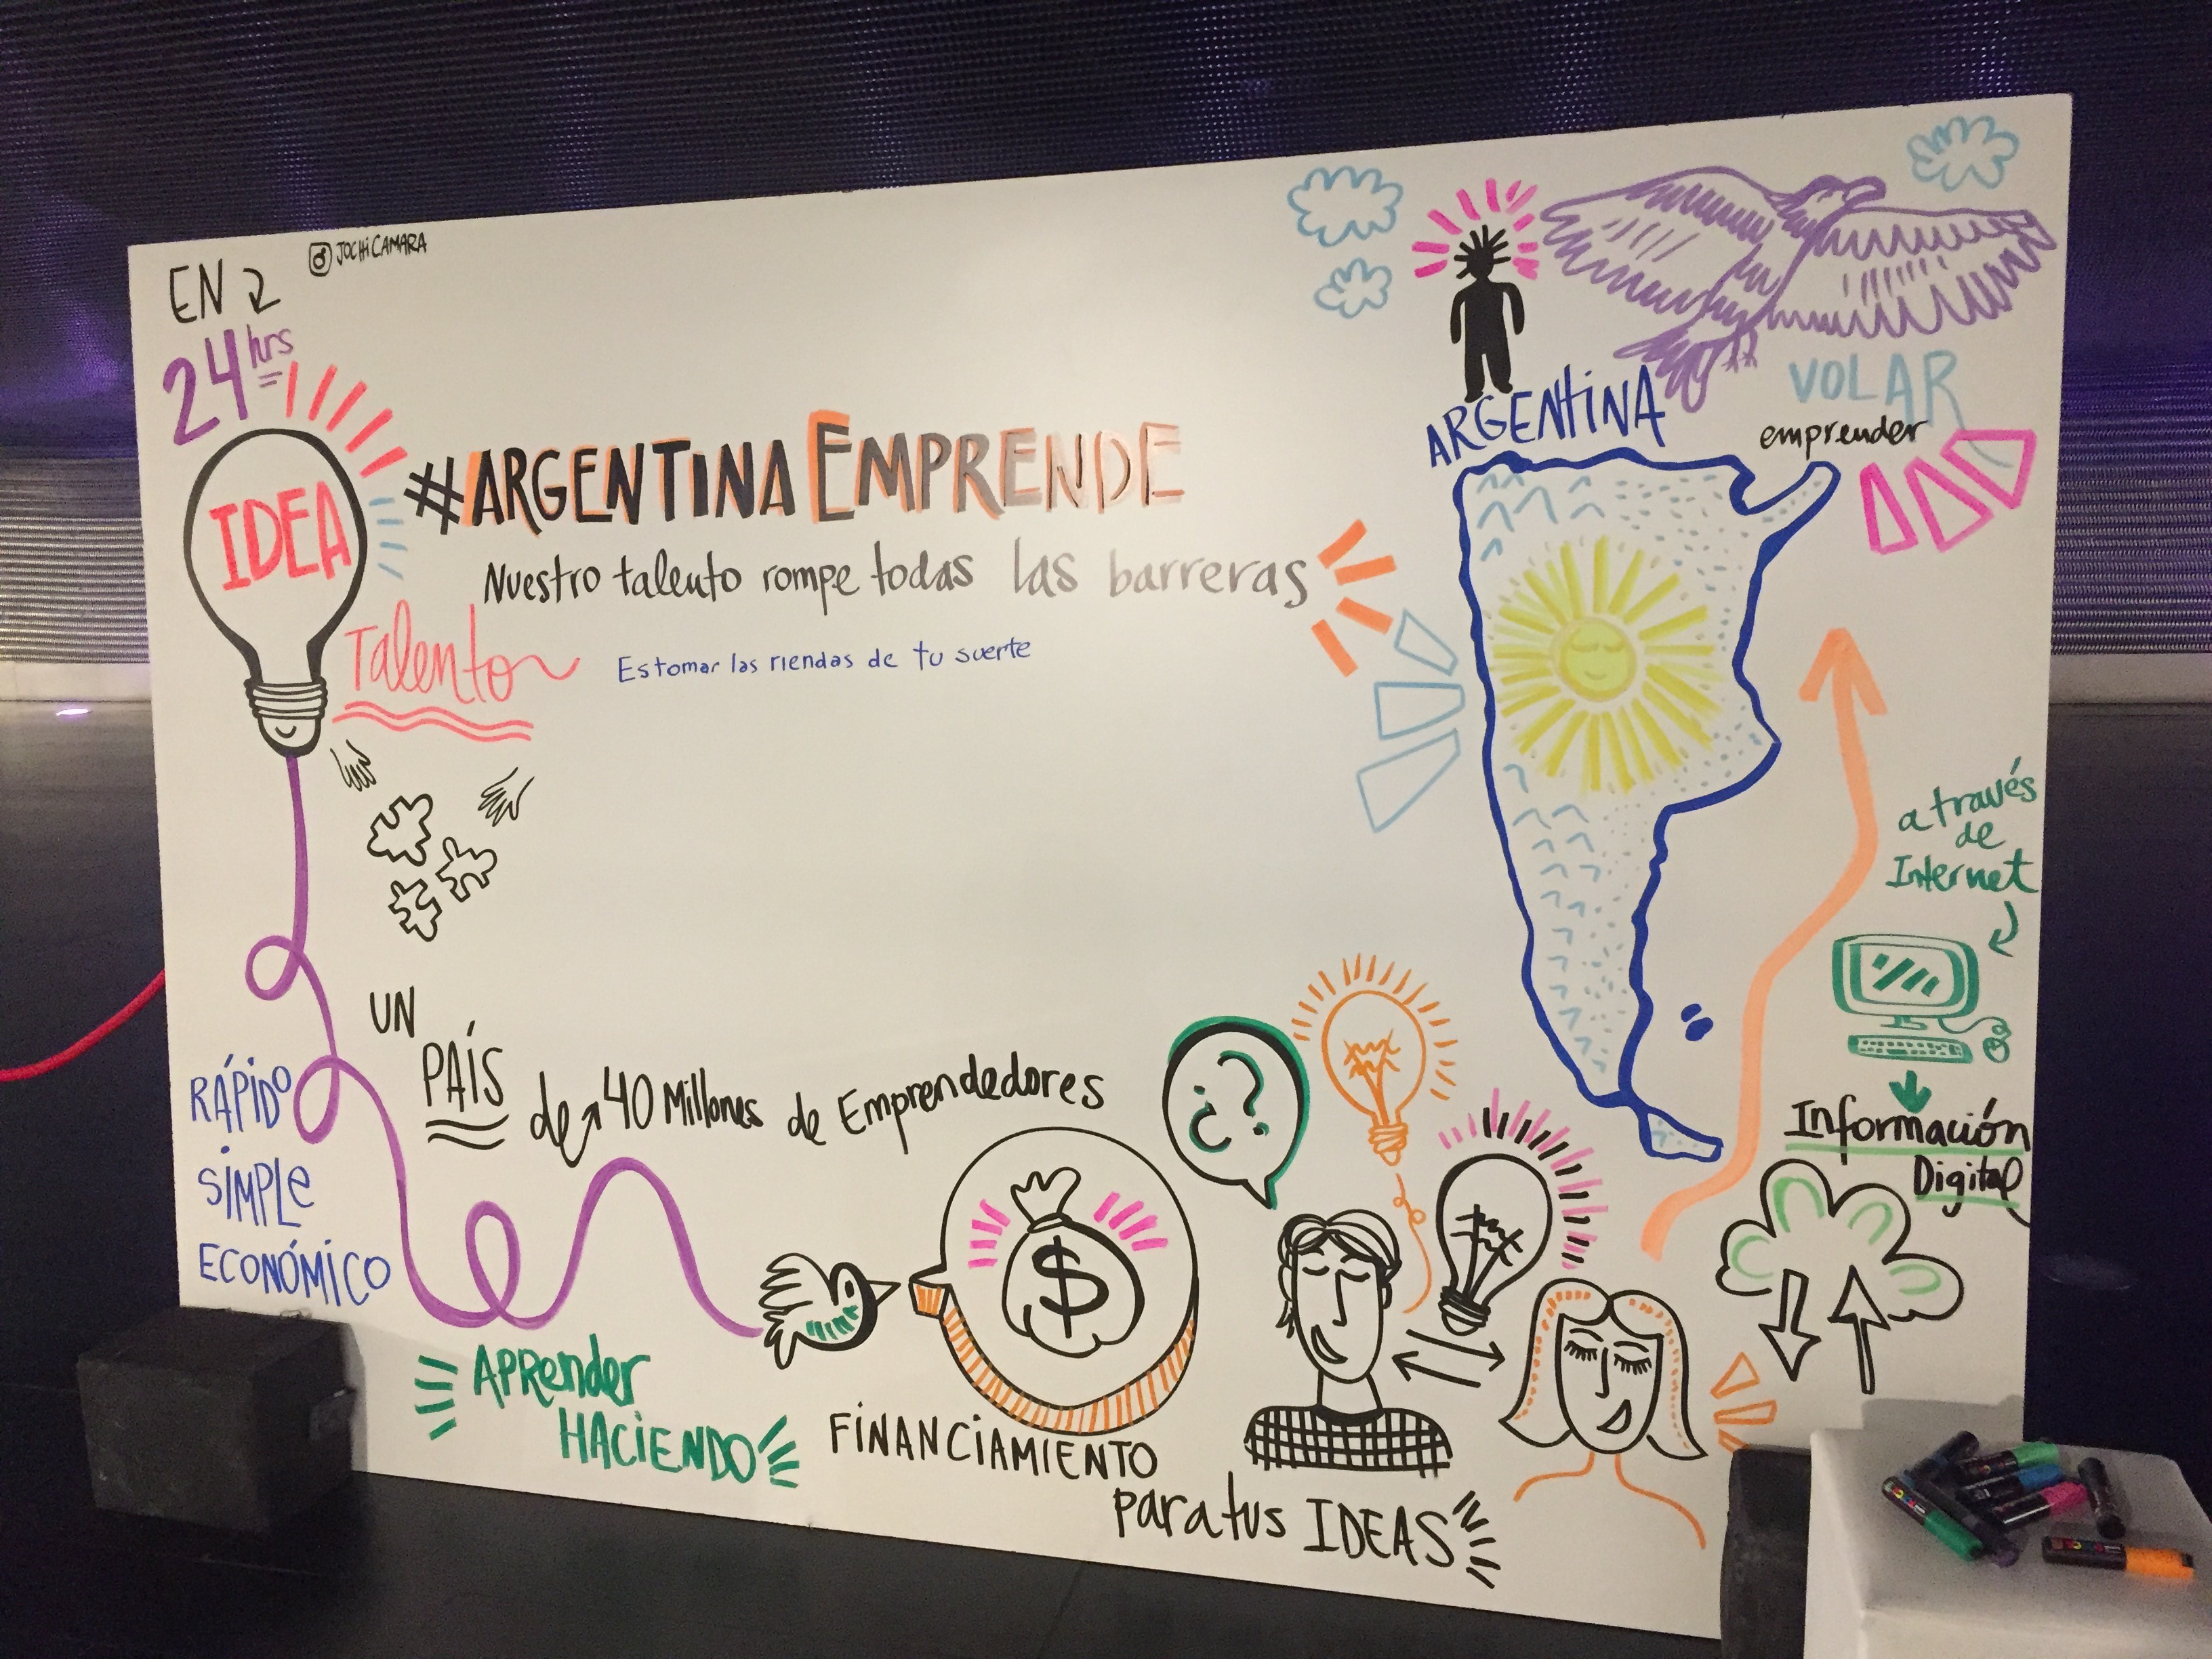 Drawings about Argentine entrepreneurship